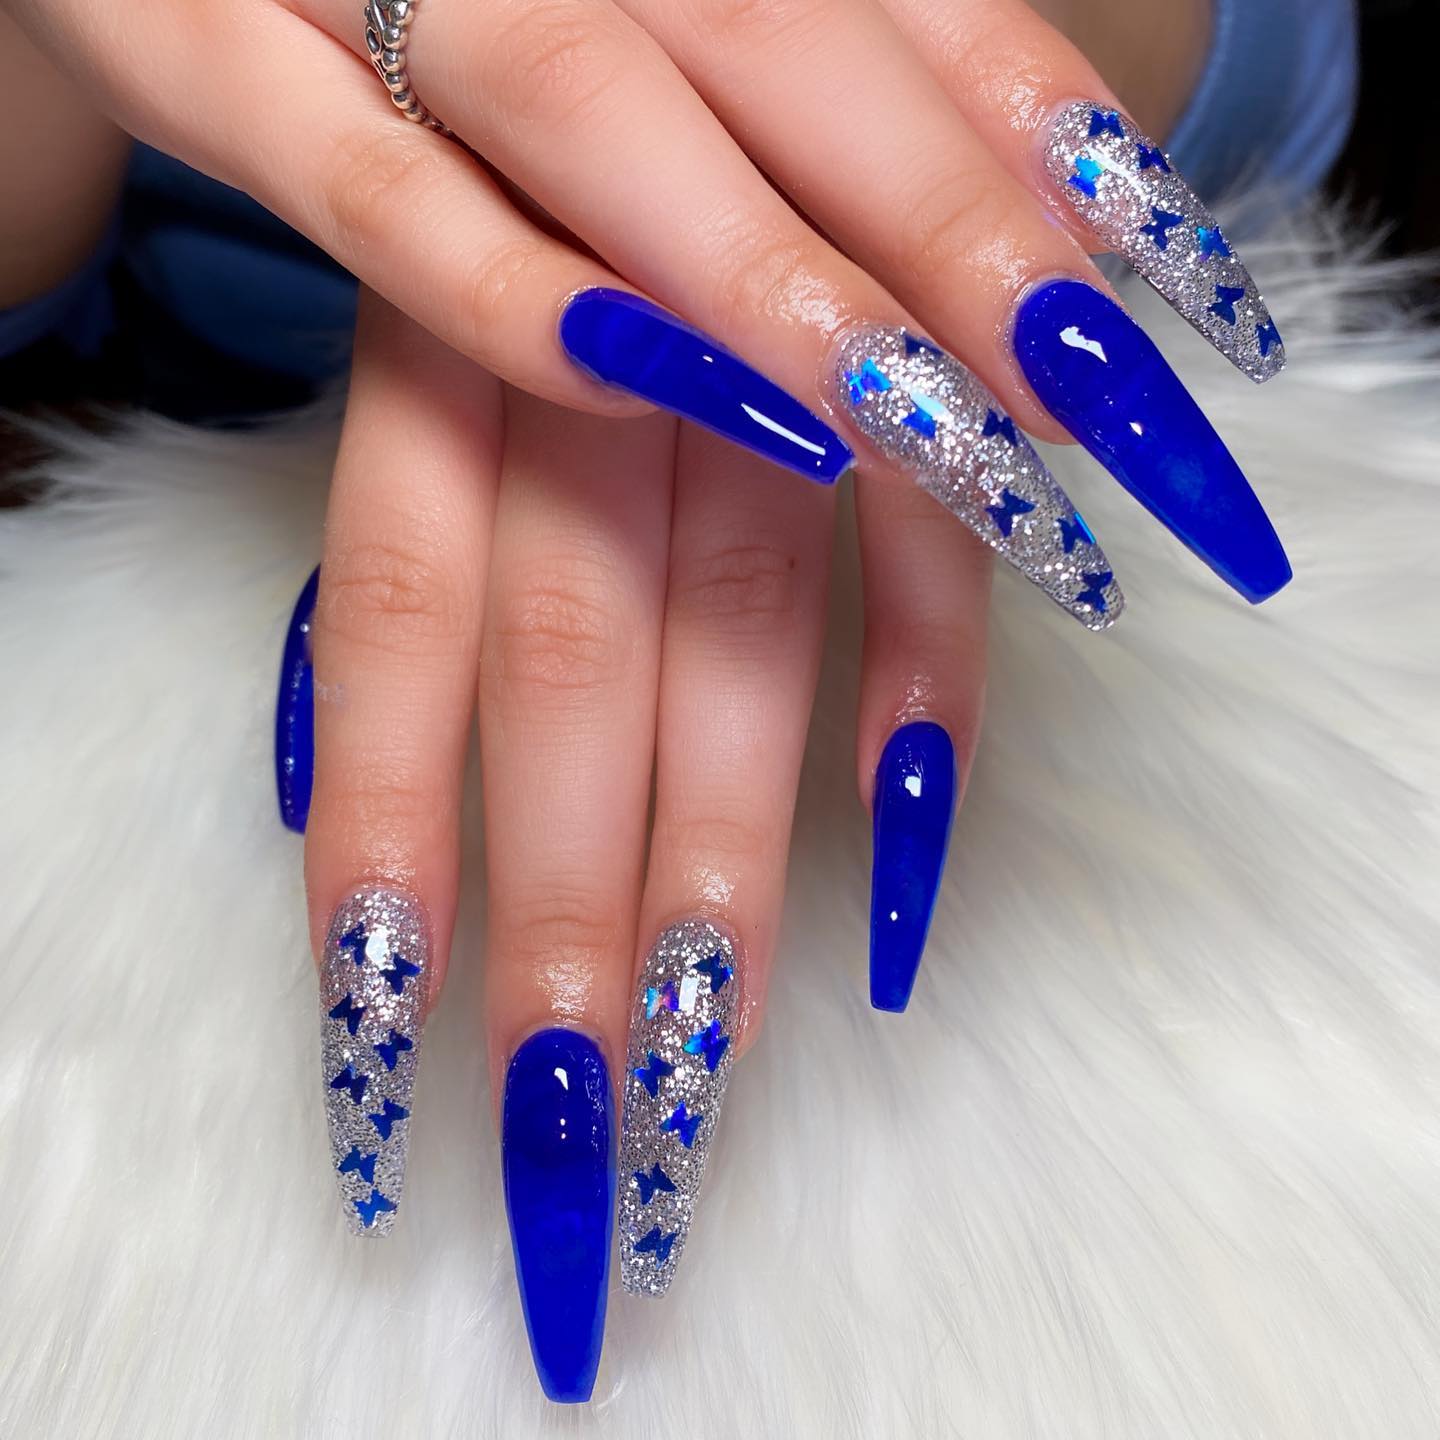 Glitter Royal Blue Coffin Nails: The Trendy Design & How-To Guide